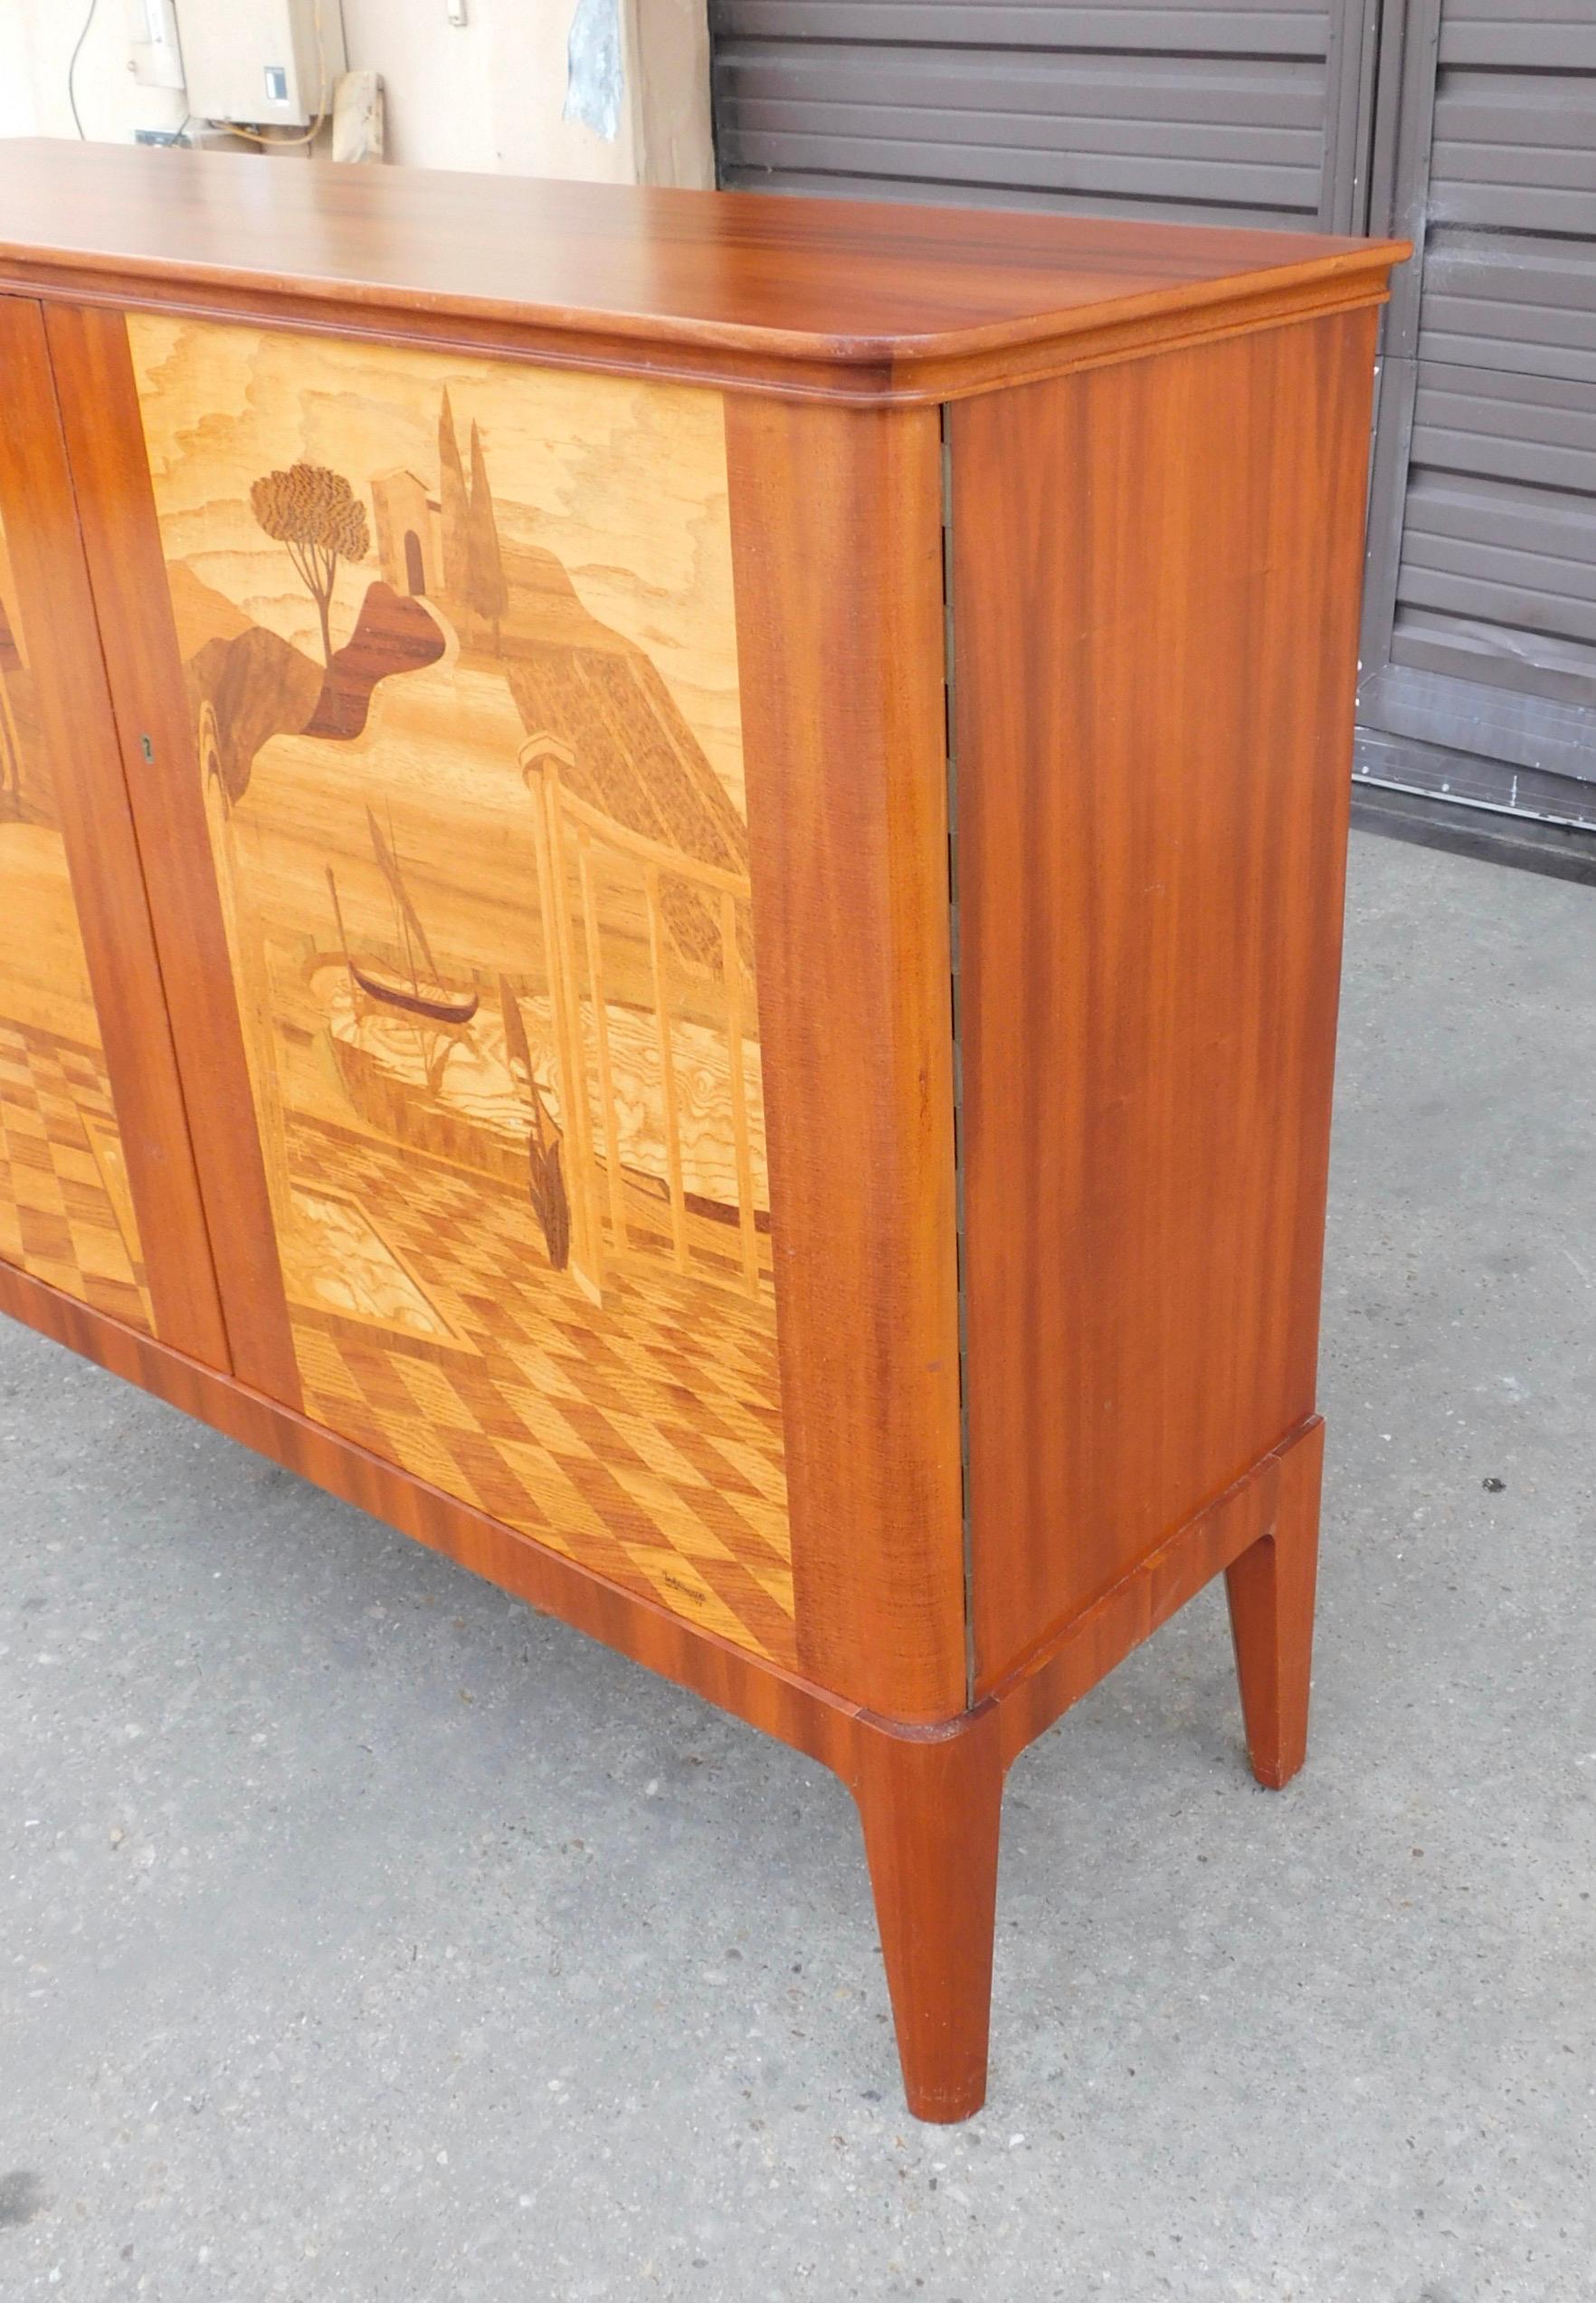 Swedish Inlaid Storage Cabinet by Erik Matsson for Mjölby Intarsia, 1943 For Sale 1